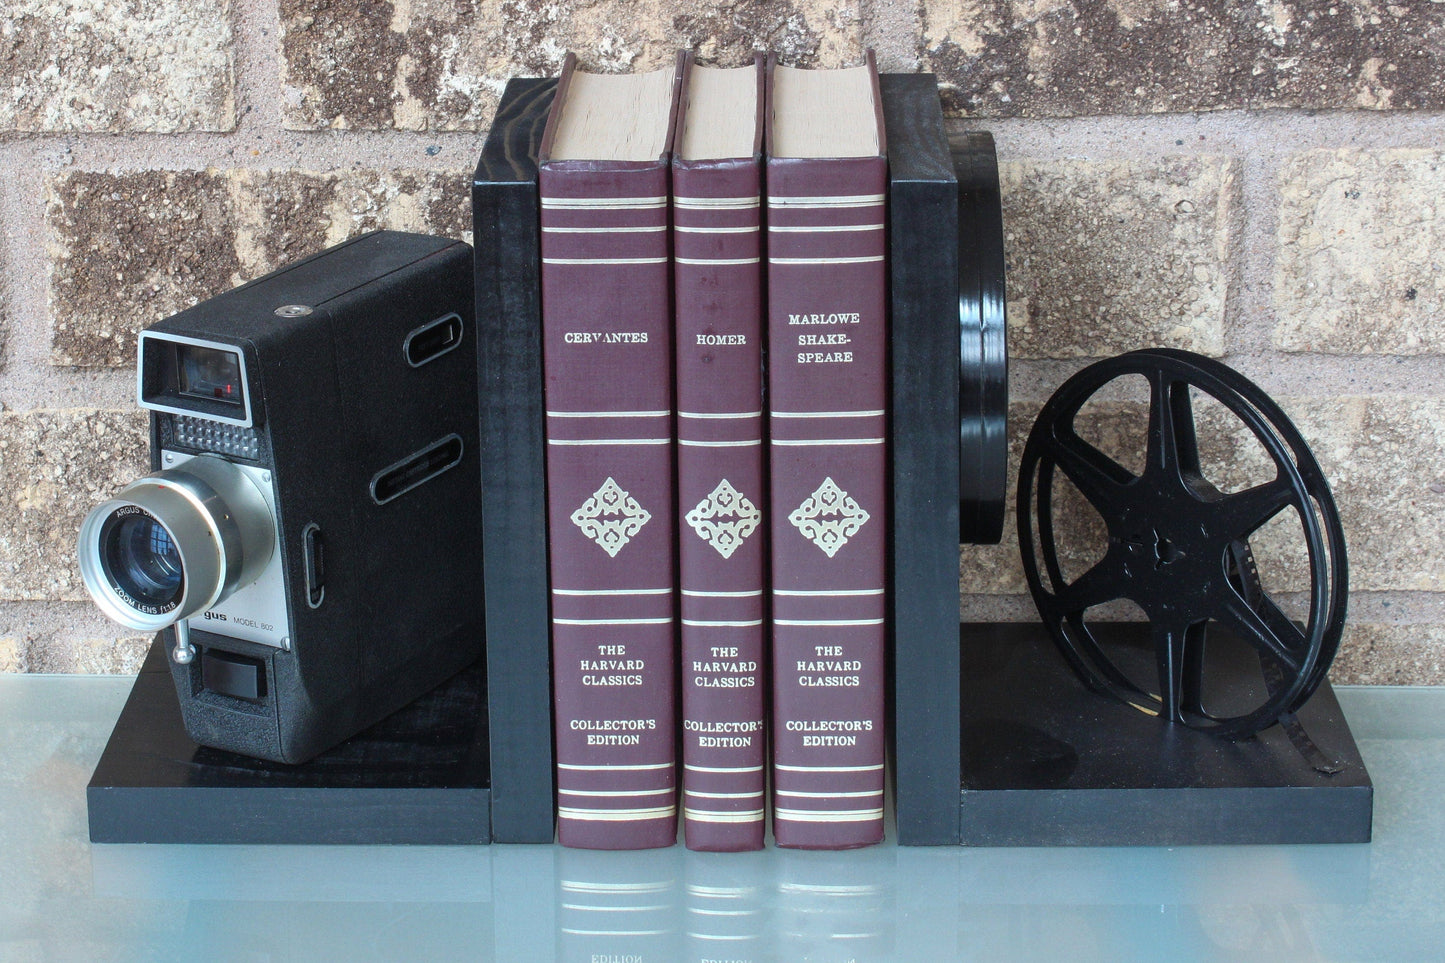 LightAndTimeArt Bookends Vintage Camera Bookends - DVD Holder - Argus Model 802 - Movie Theater Décor - Movie Maker Gift - Git for Actor and Actress